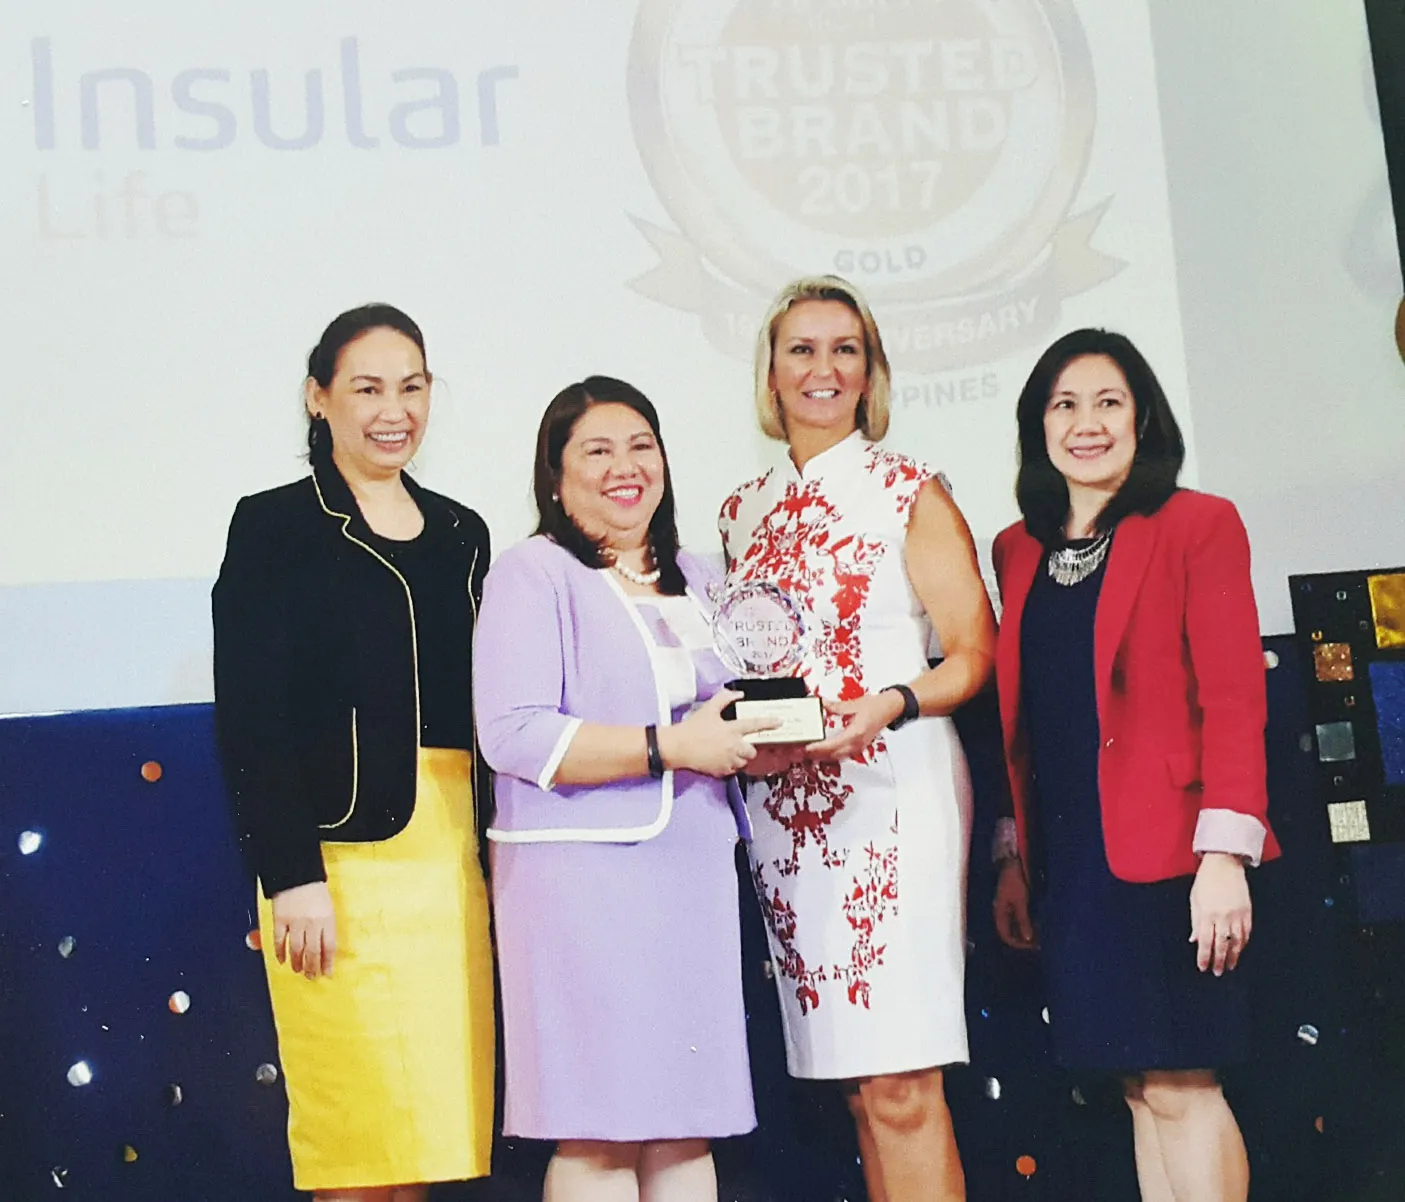 insular-life-receives-readers-digest-2017-trusted-brand-gold-award